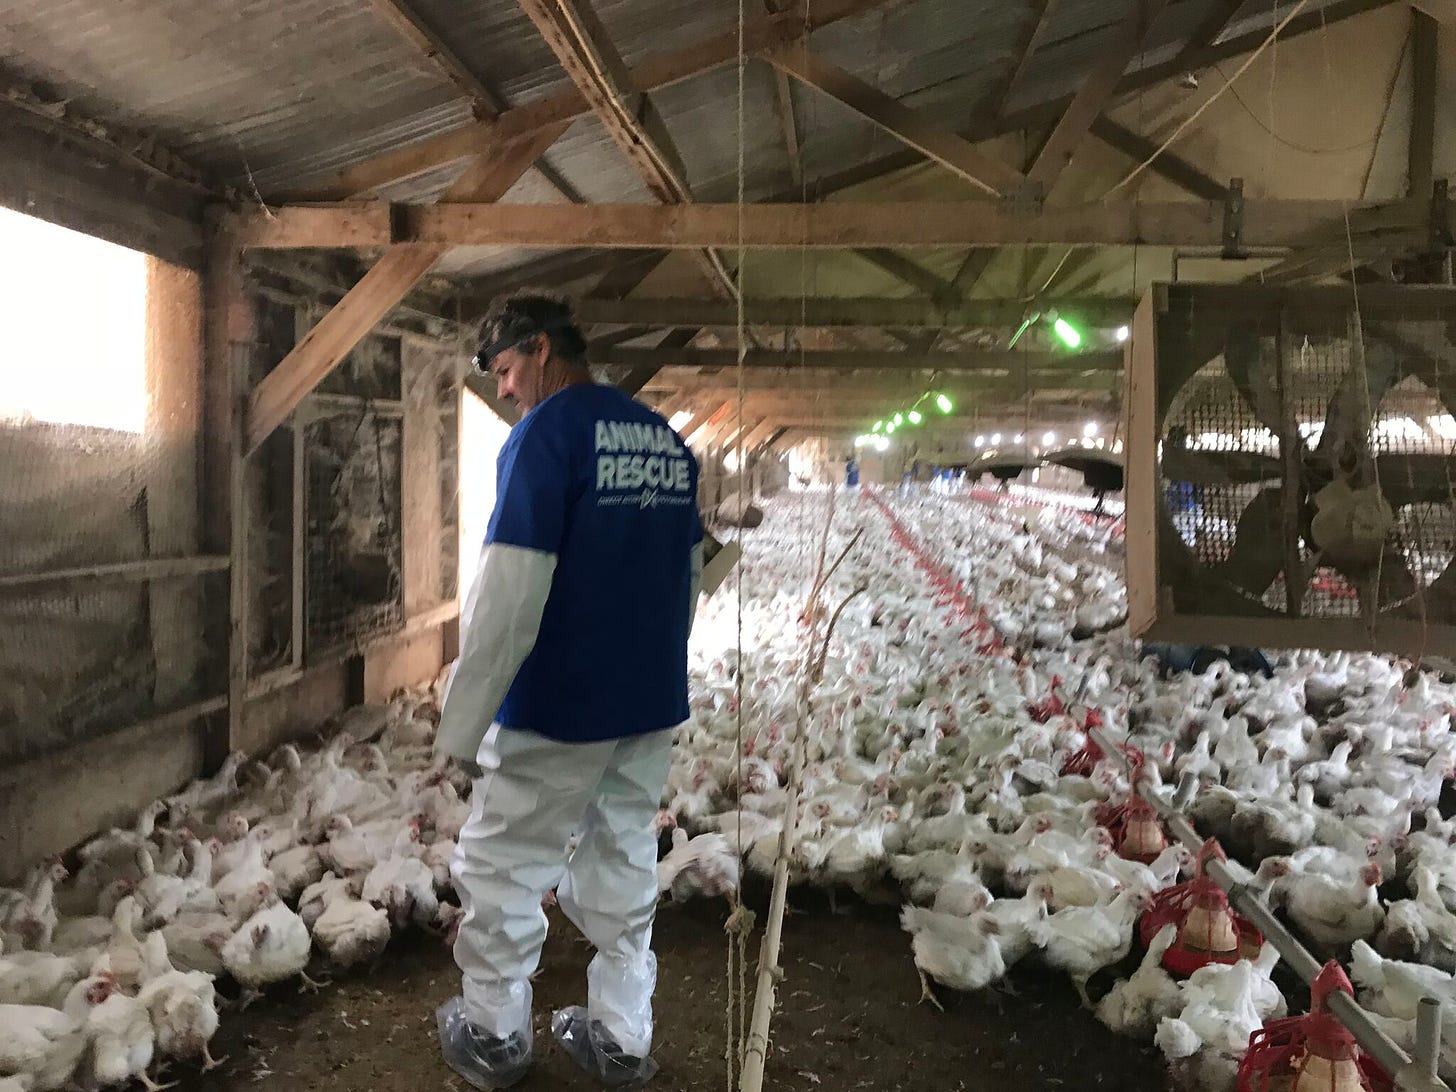 Activists Occupy "Free Range" Amazon Chicken Supplier, Remove Dozens of  Dead or Dying Animals : Indybay